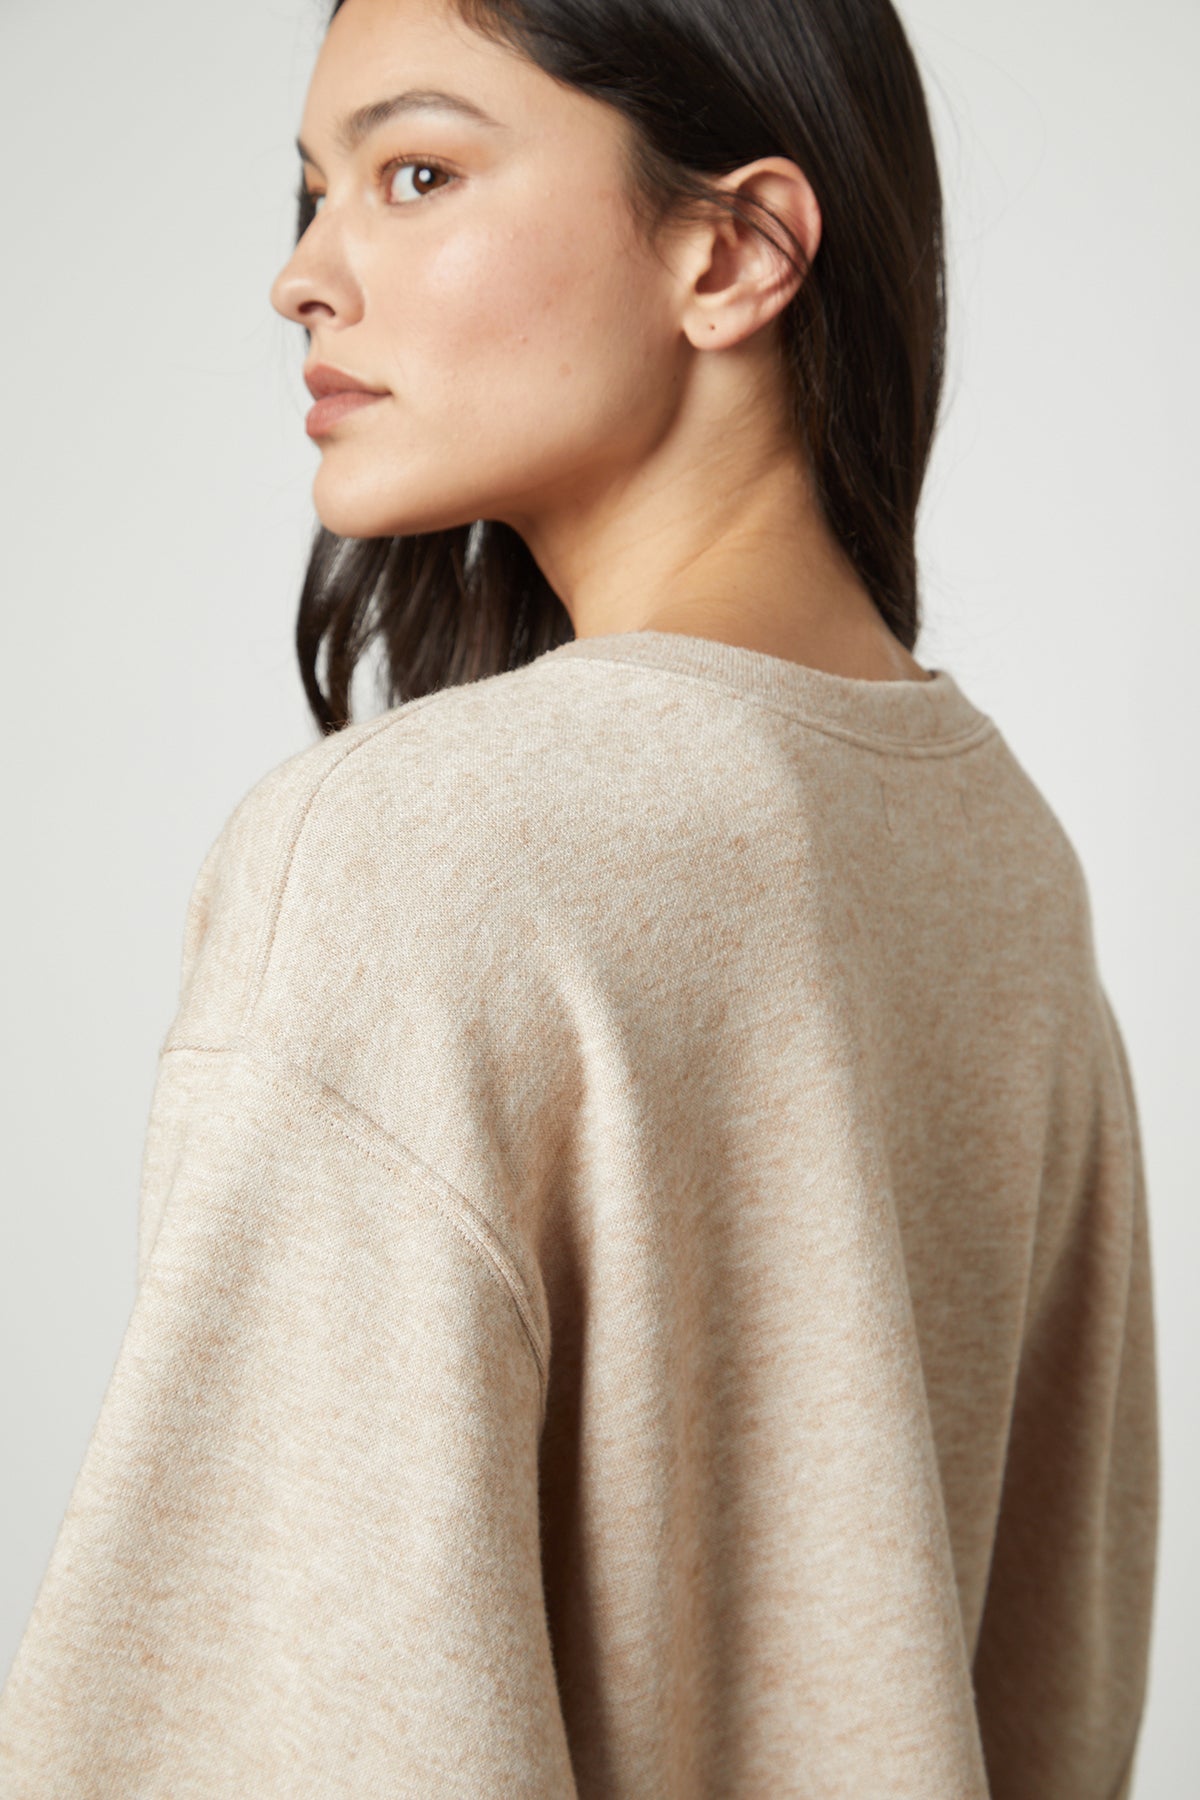   The NIA DOUBLE KNIT CROPPED CREW sweater by Velvet by Graham & Spencer on the woman exudes comfort and style. 